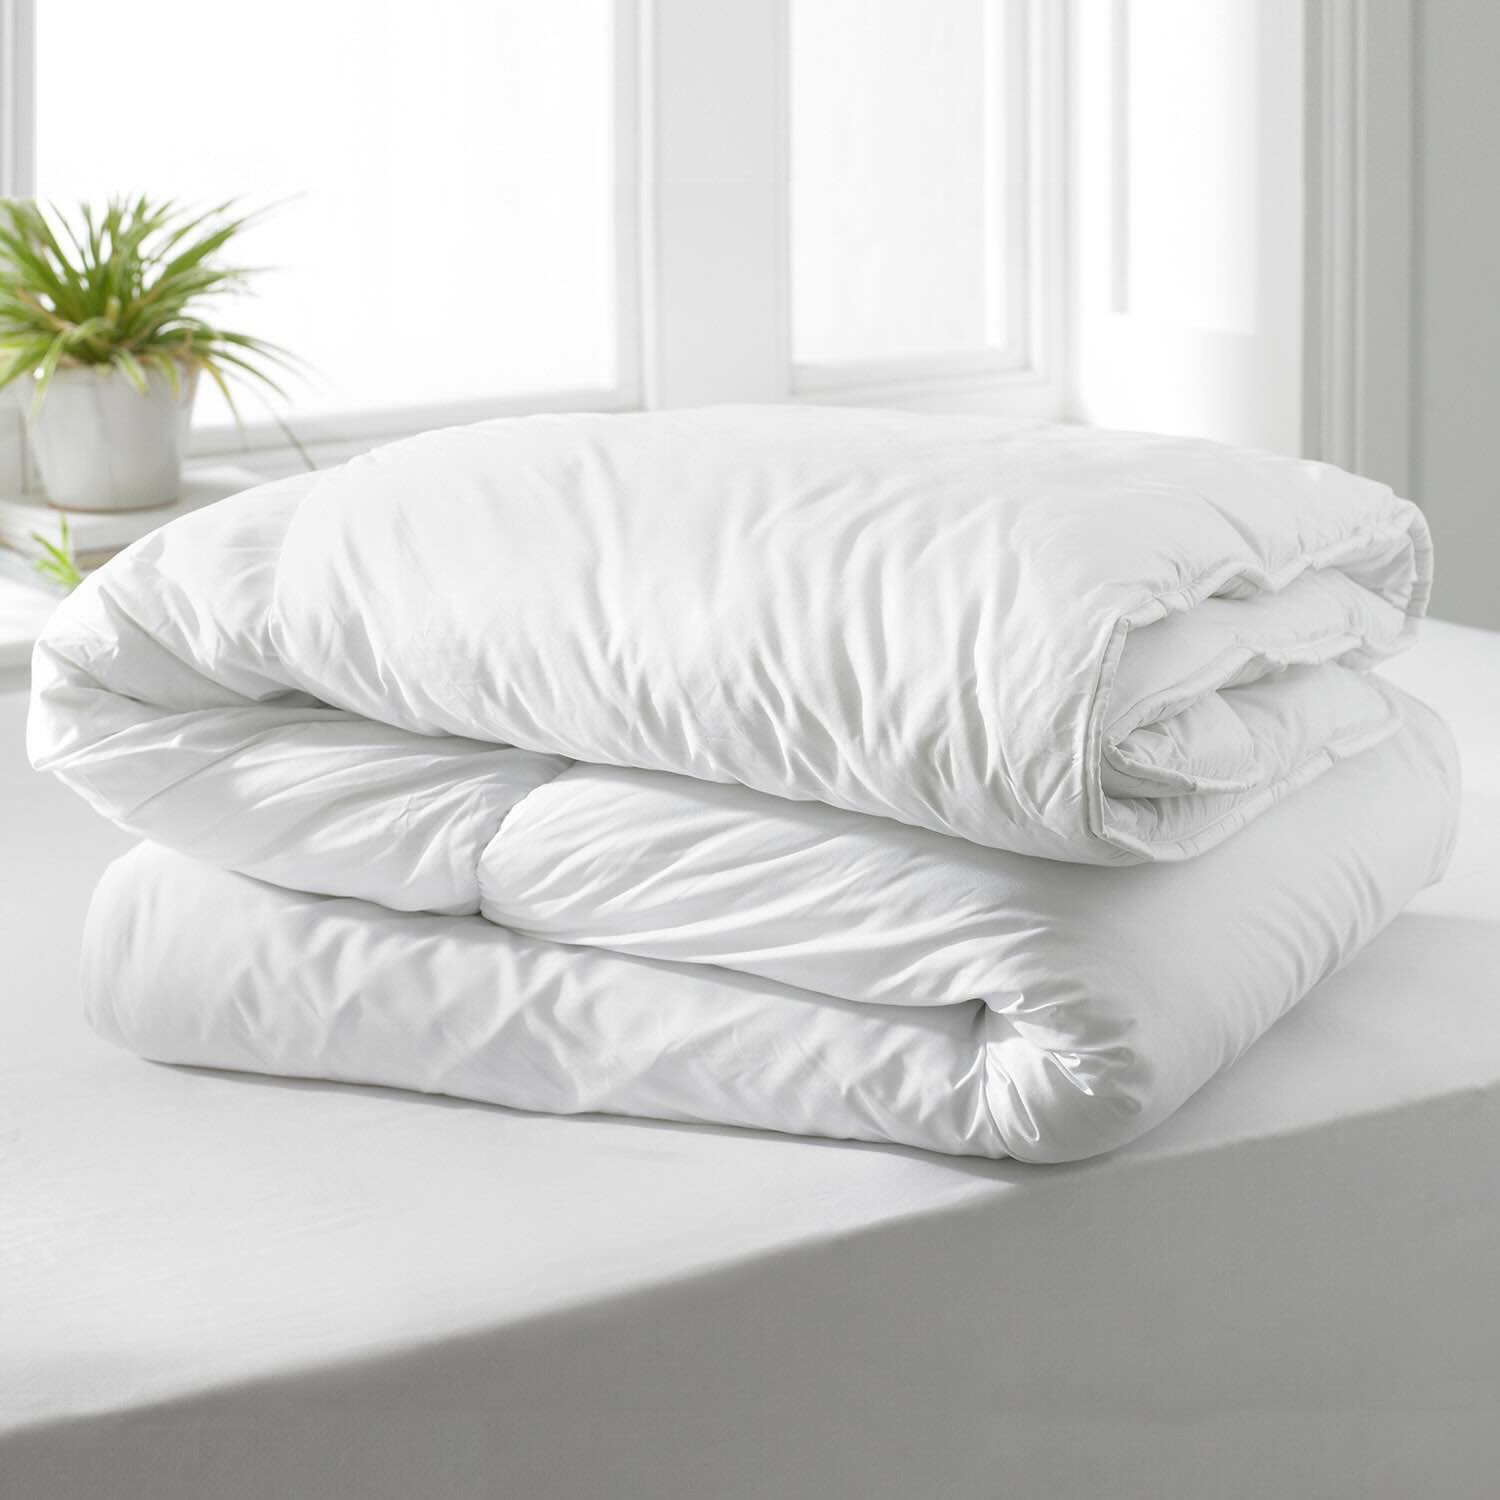 What Tog Duvet Is Suitable For Winter